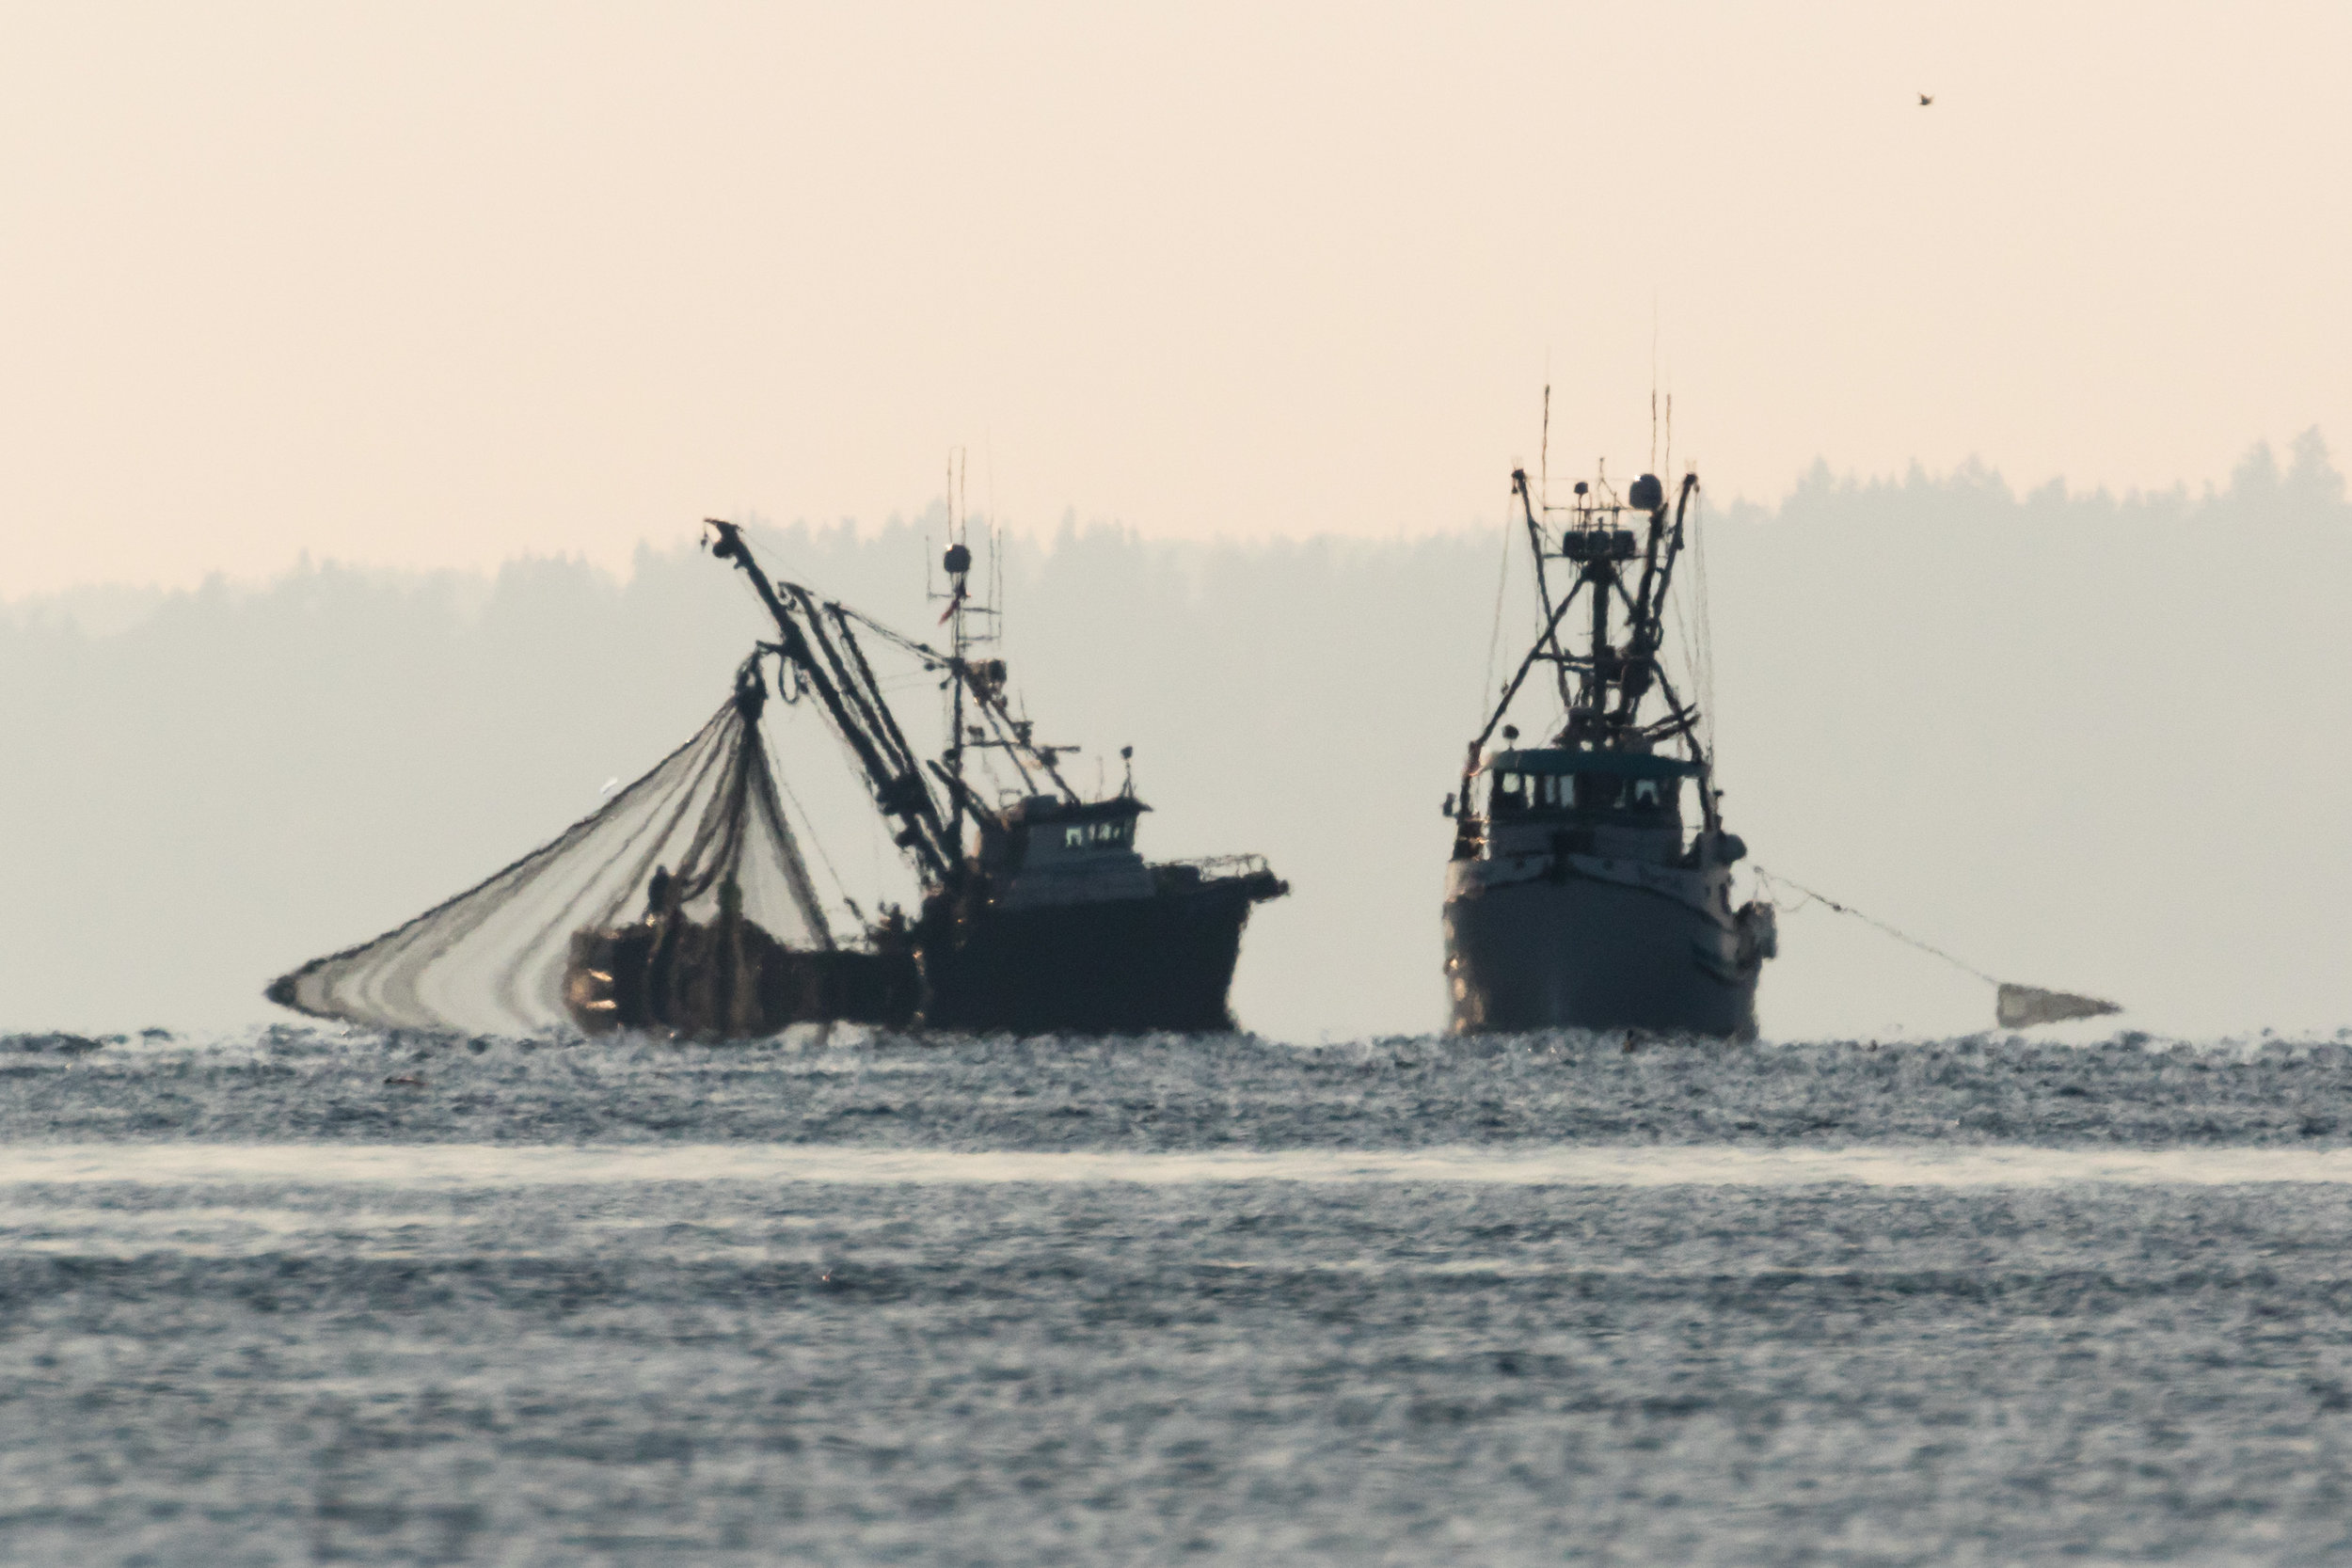 Hazy Commercial Fishing Vessels.  Puget Sound, WA